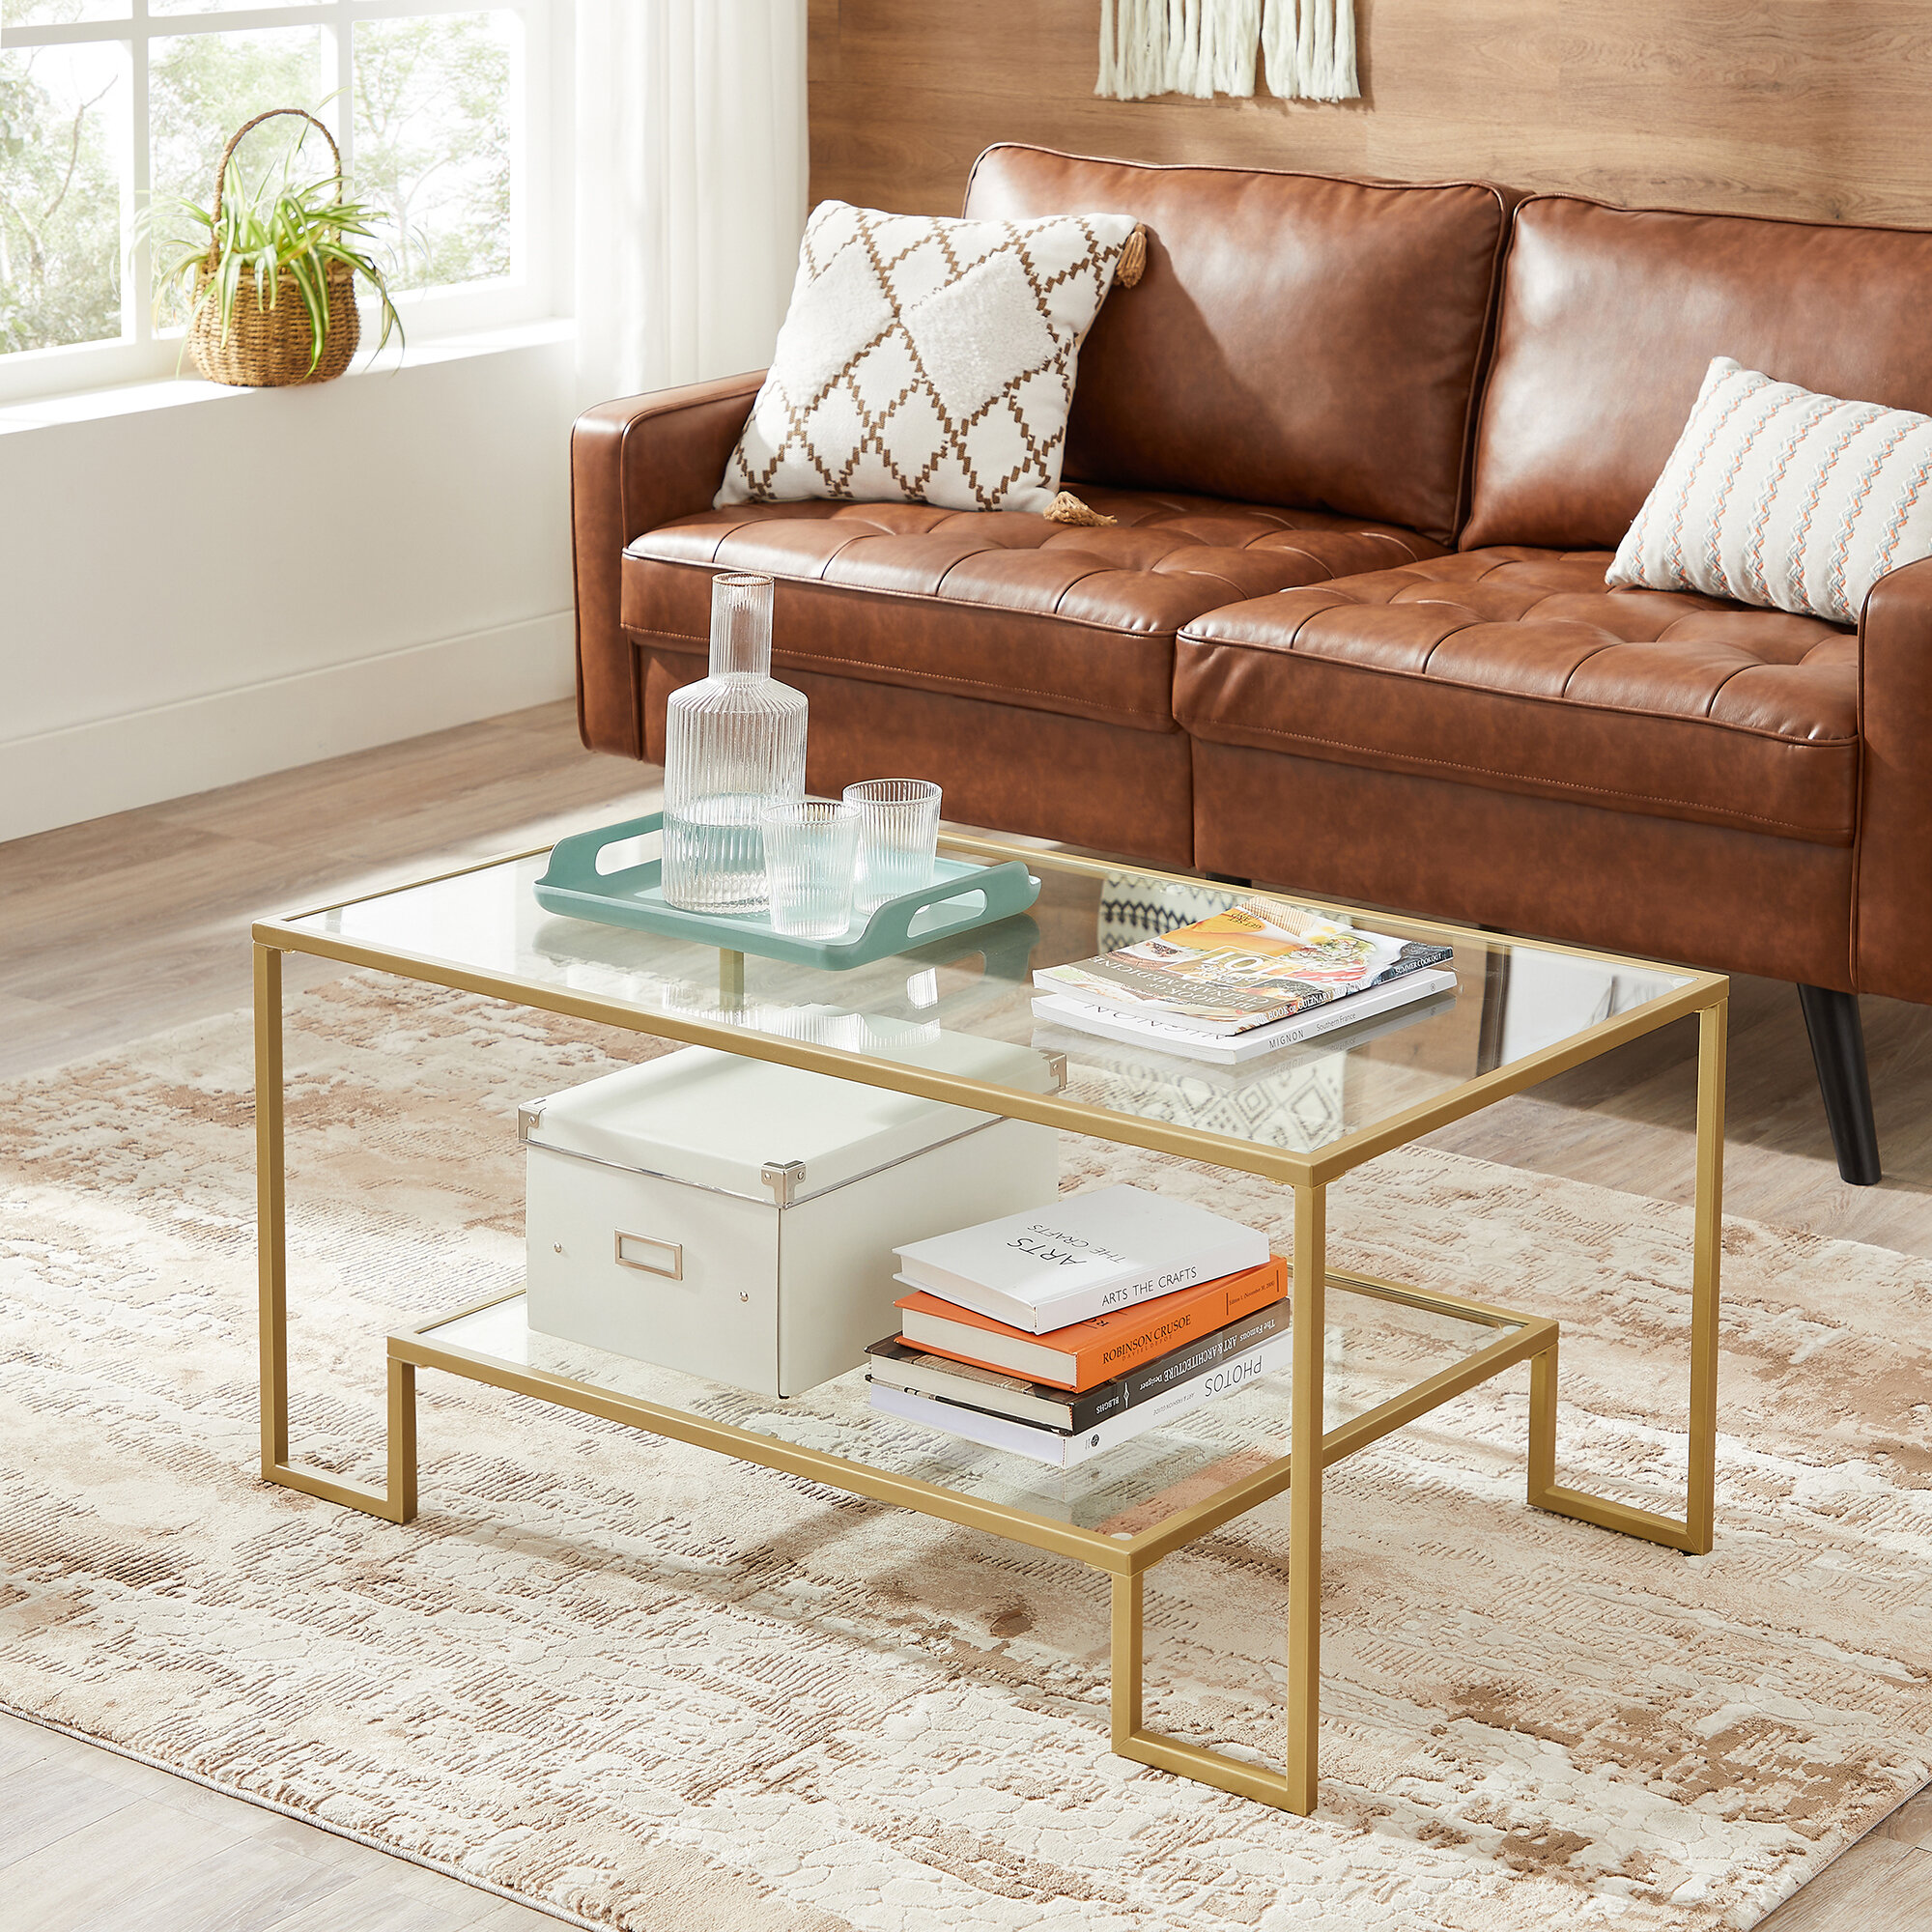 Donahue Frame Coffee Table with Storage